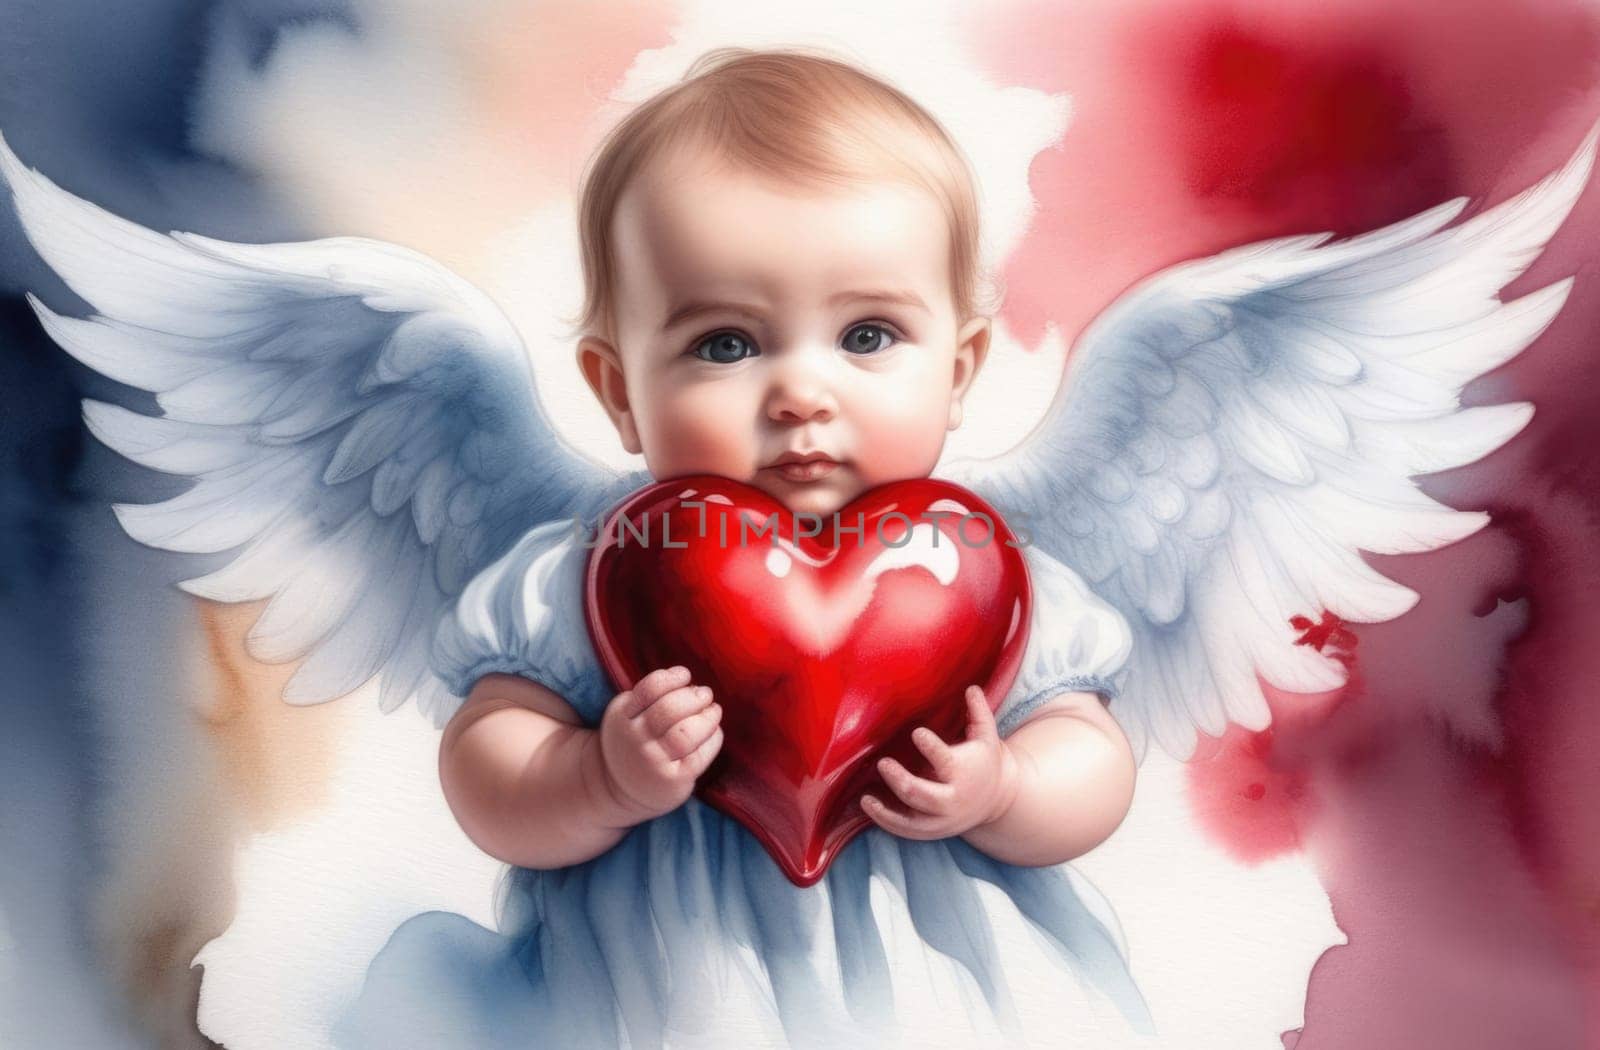 Little angel baby holding a red heart in his hands. Valentine's Day. Cupid's little child.